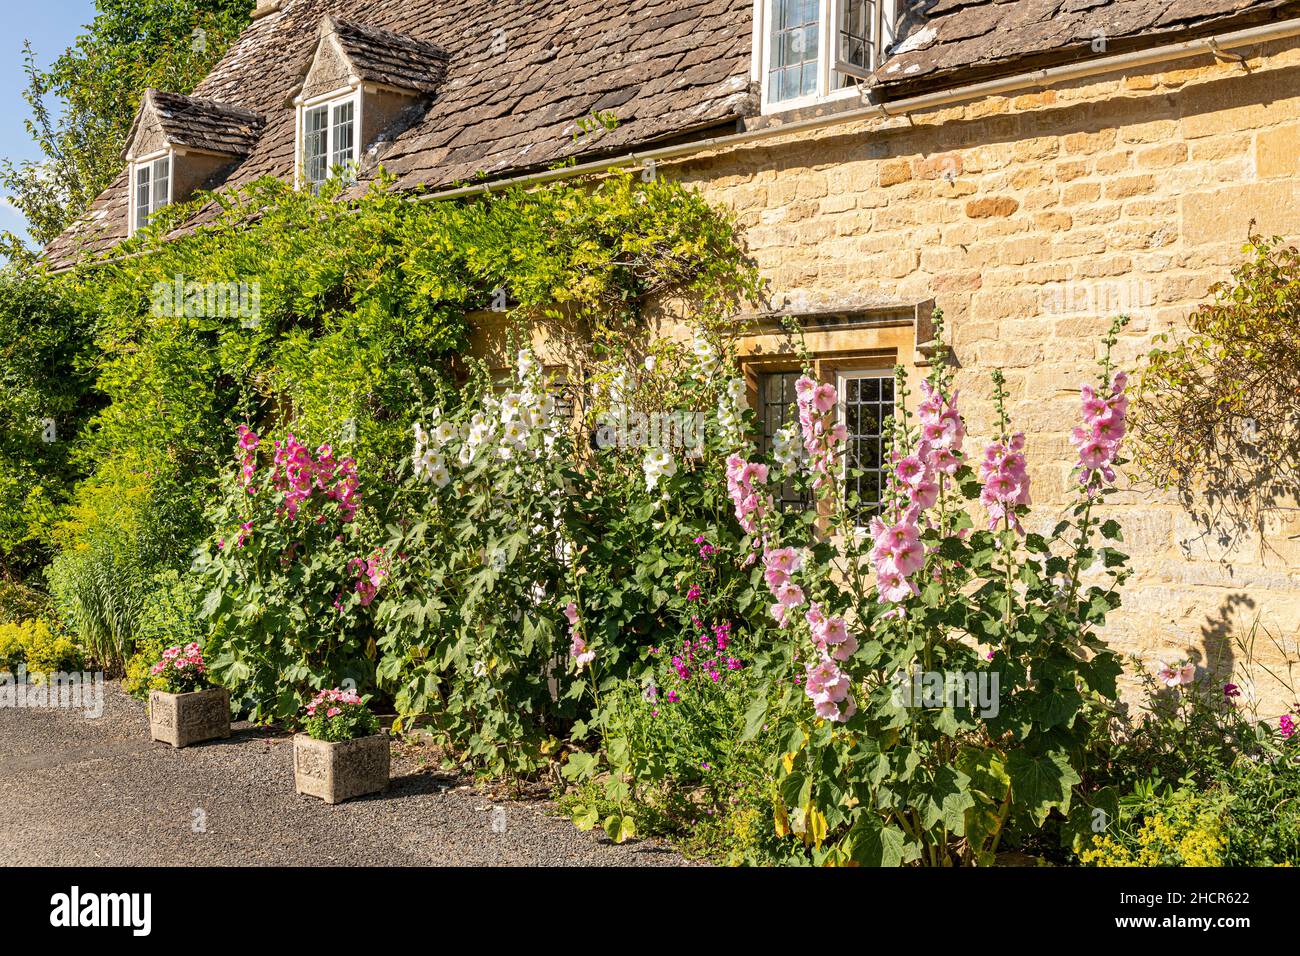 Hollyhocks flowering outside a traditional stone cottage in the Cotswold village of Taynton, Oxfordhire UK Stock Photo